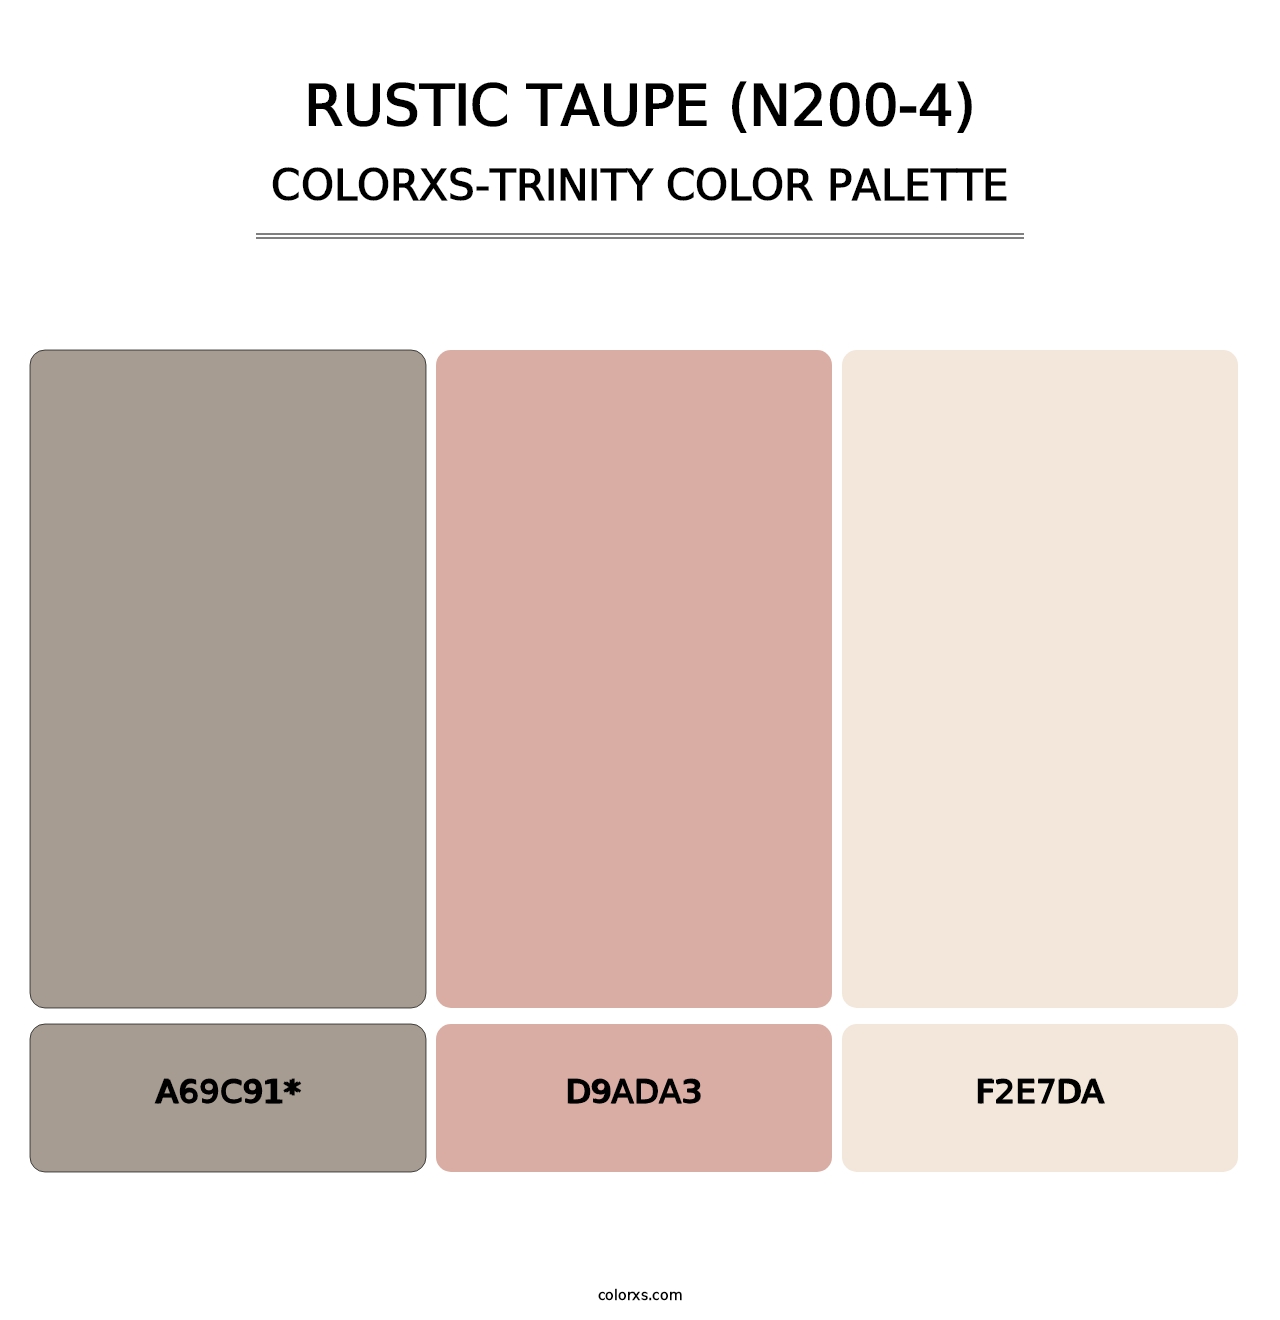 Rustic Taupe (N200-4) - Colorxs Trinity Palette